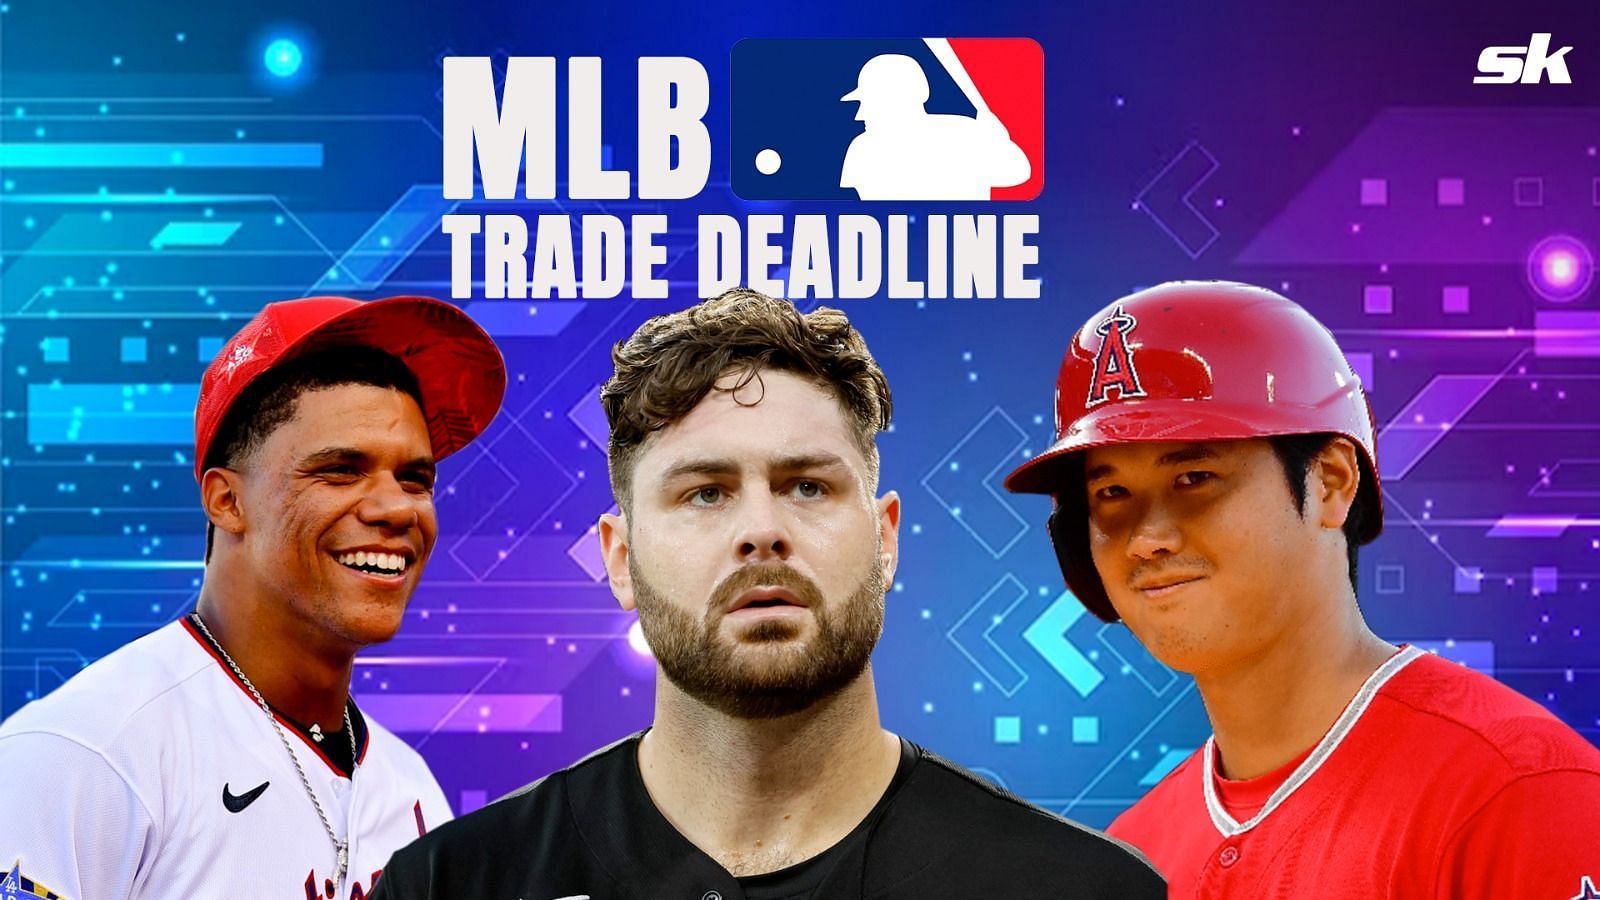 MLB Trade Deadline 2023 promises loads of deals and thrills